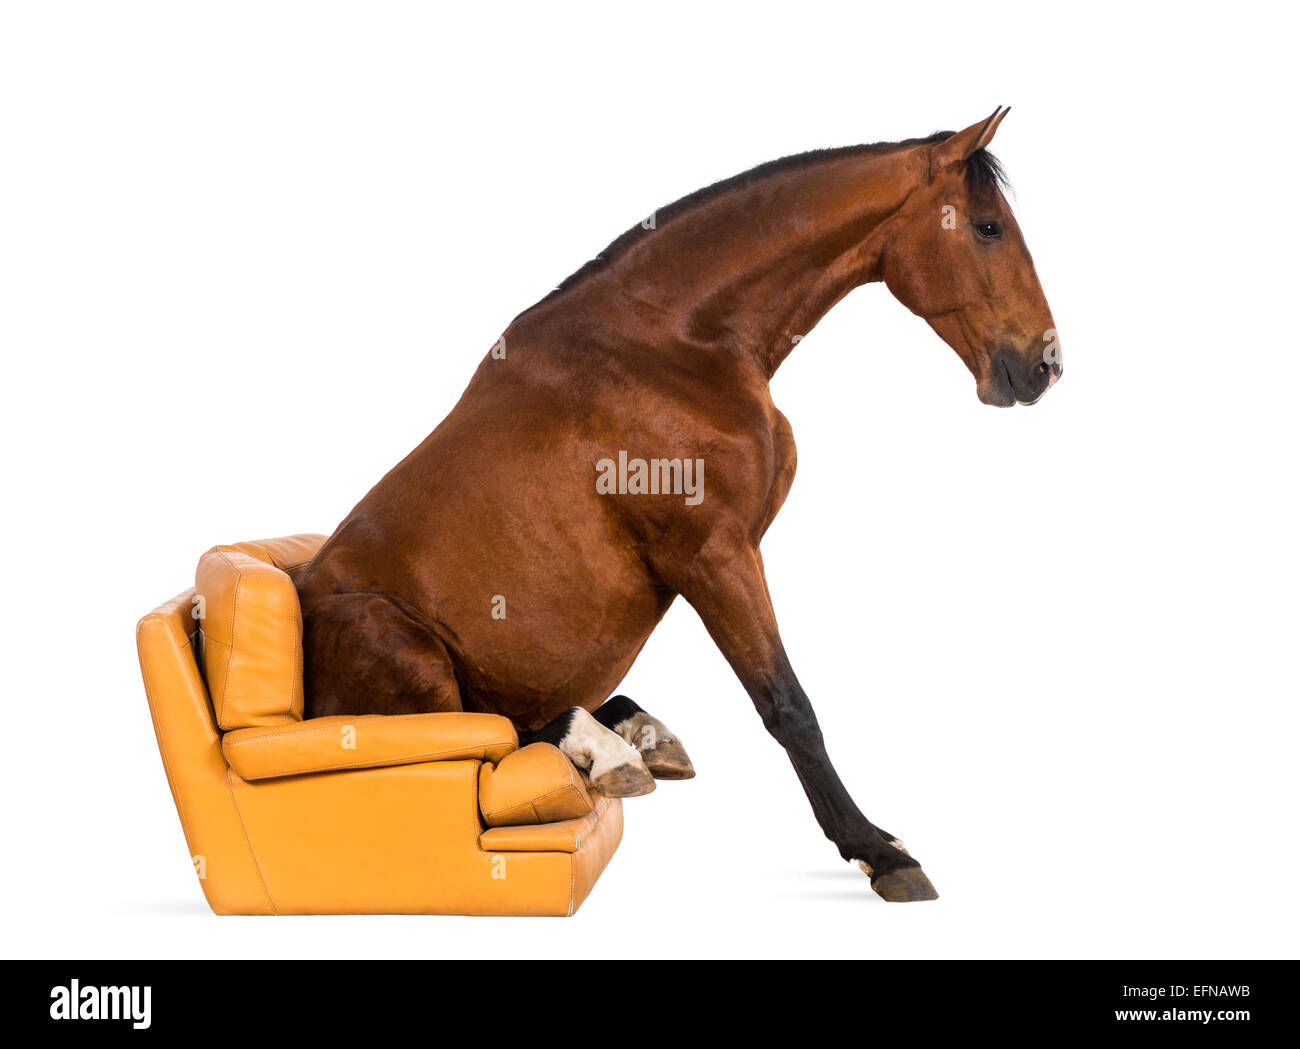 Andalusian horse sitting on an armchair against white background Stock Photo